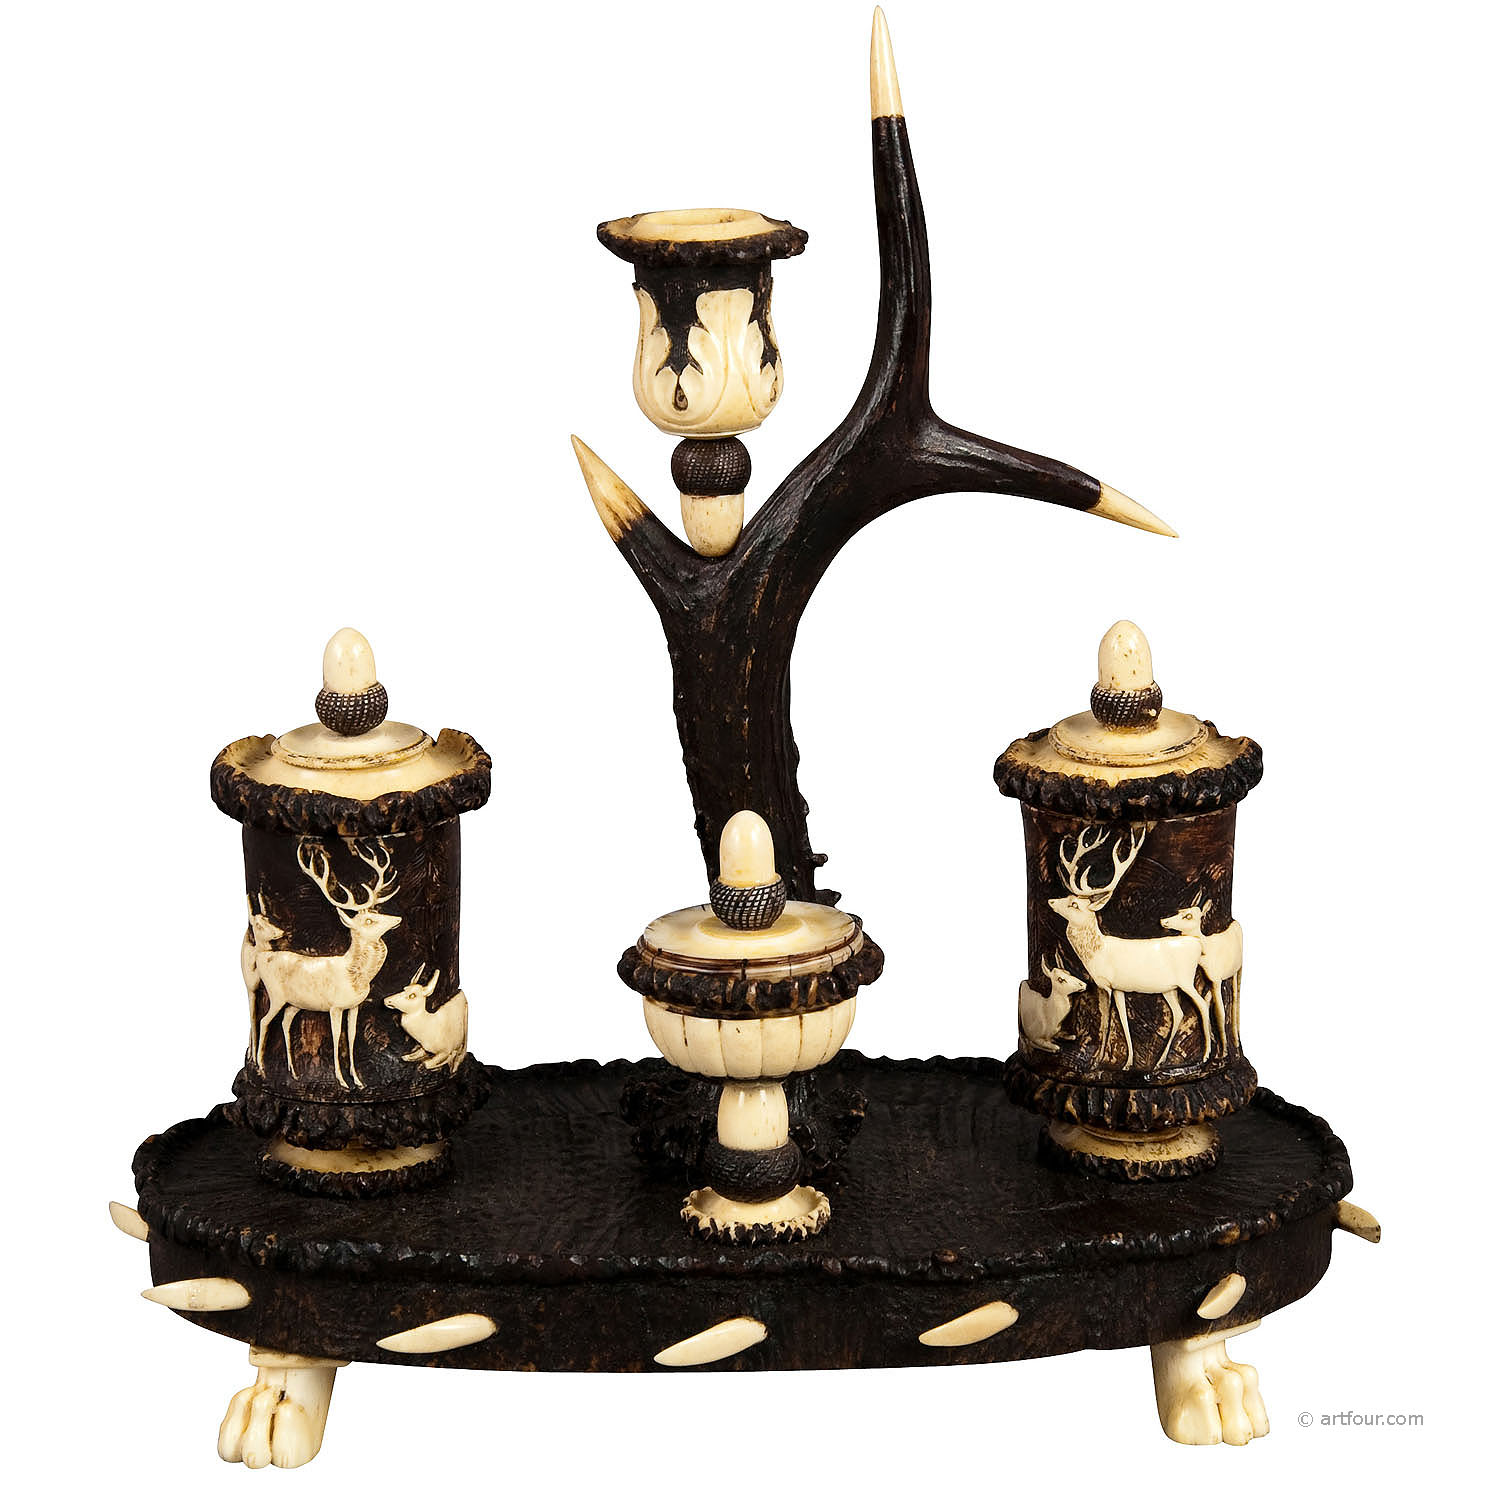 Rare Antler Desk Standish with Elaborate Carvings, Germany ca. 1840